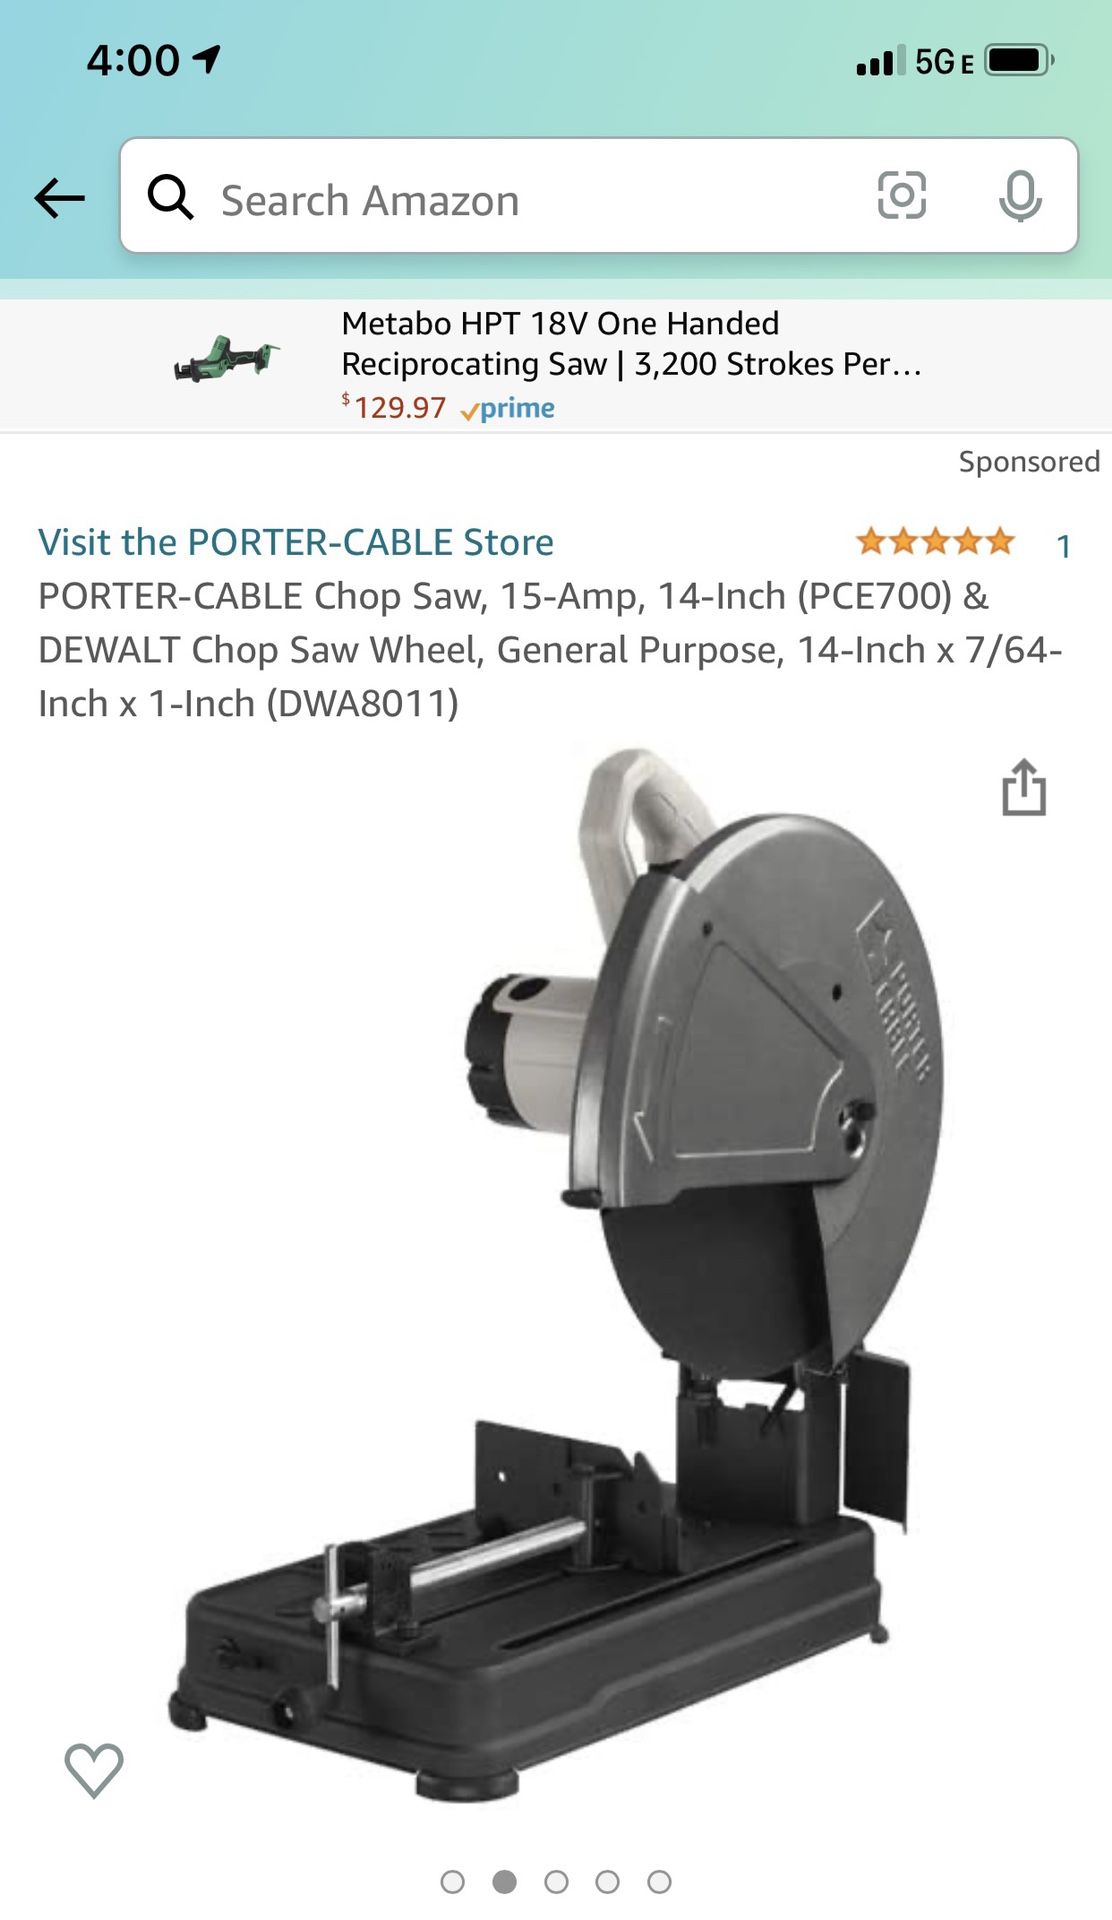 PORTER-CABLE Chop Saw, for Sale in New York, NY OfferUp